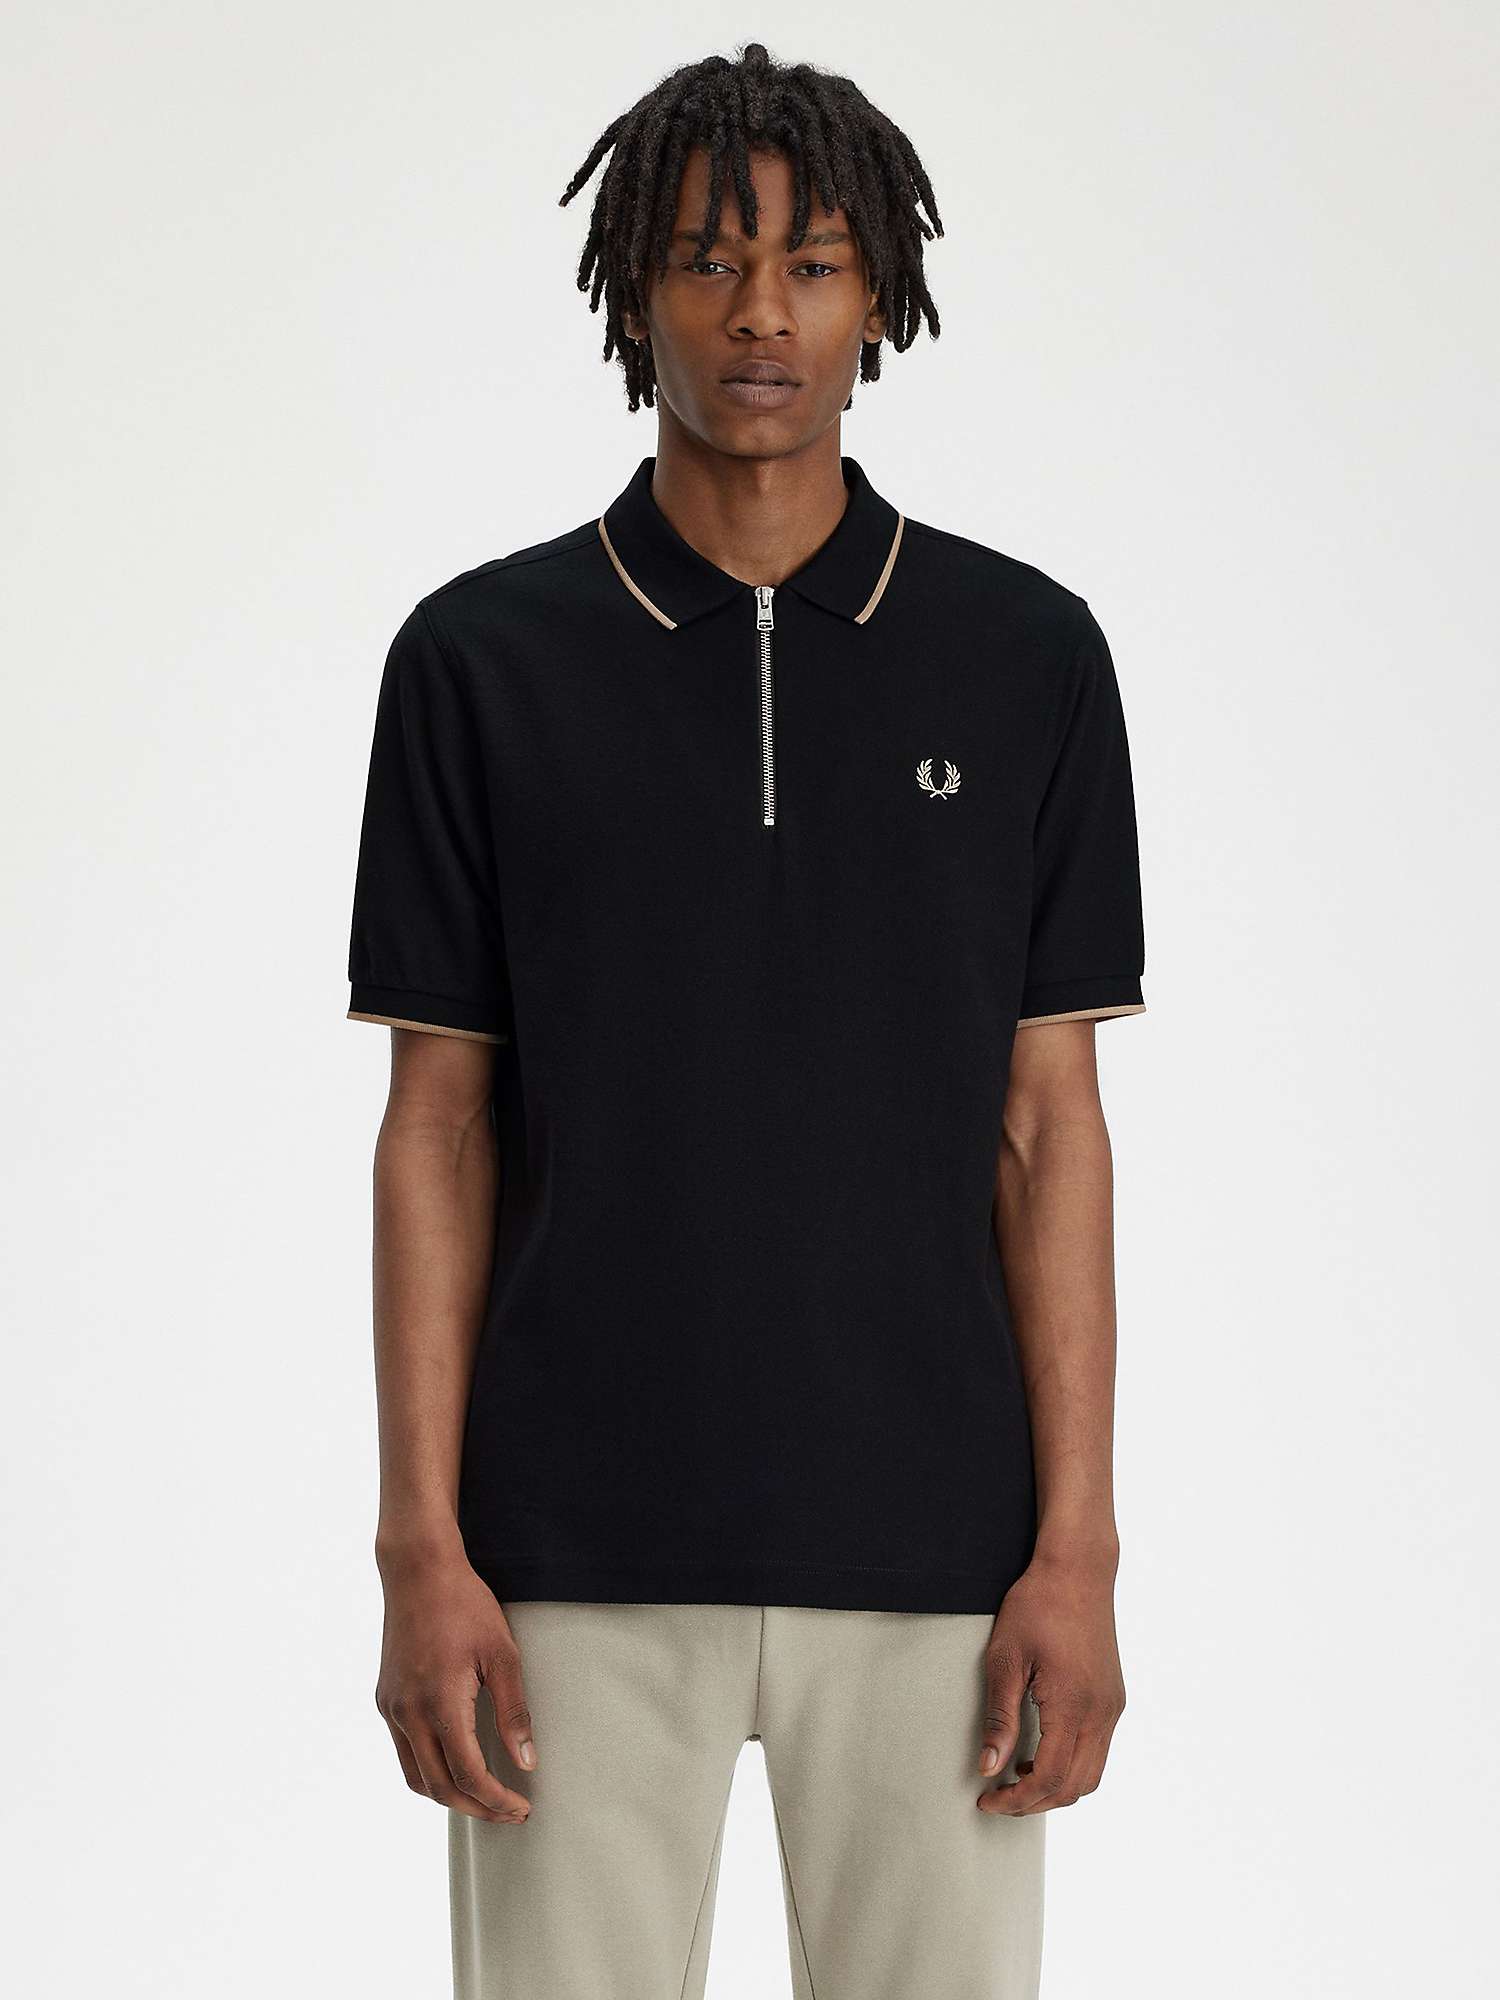 Buy Fred Perry Cotton Crepe Piqué Polo Shirt, Black Online at johnlewis.com